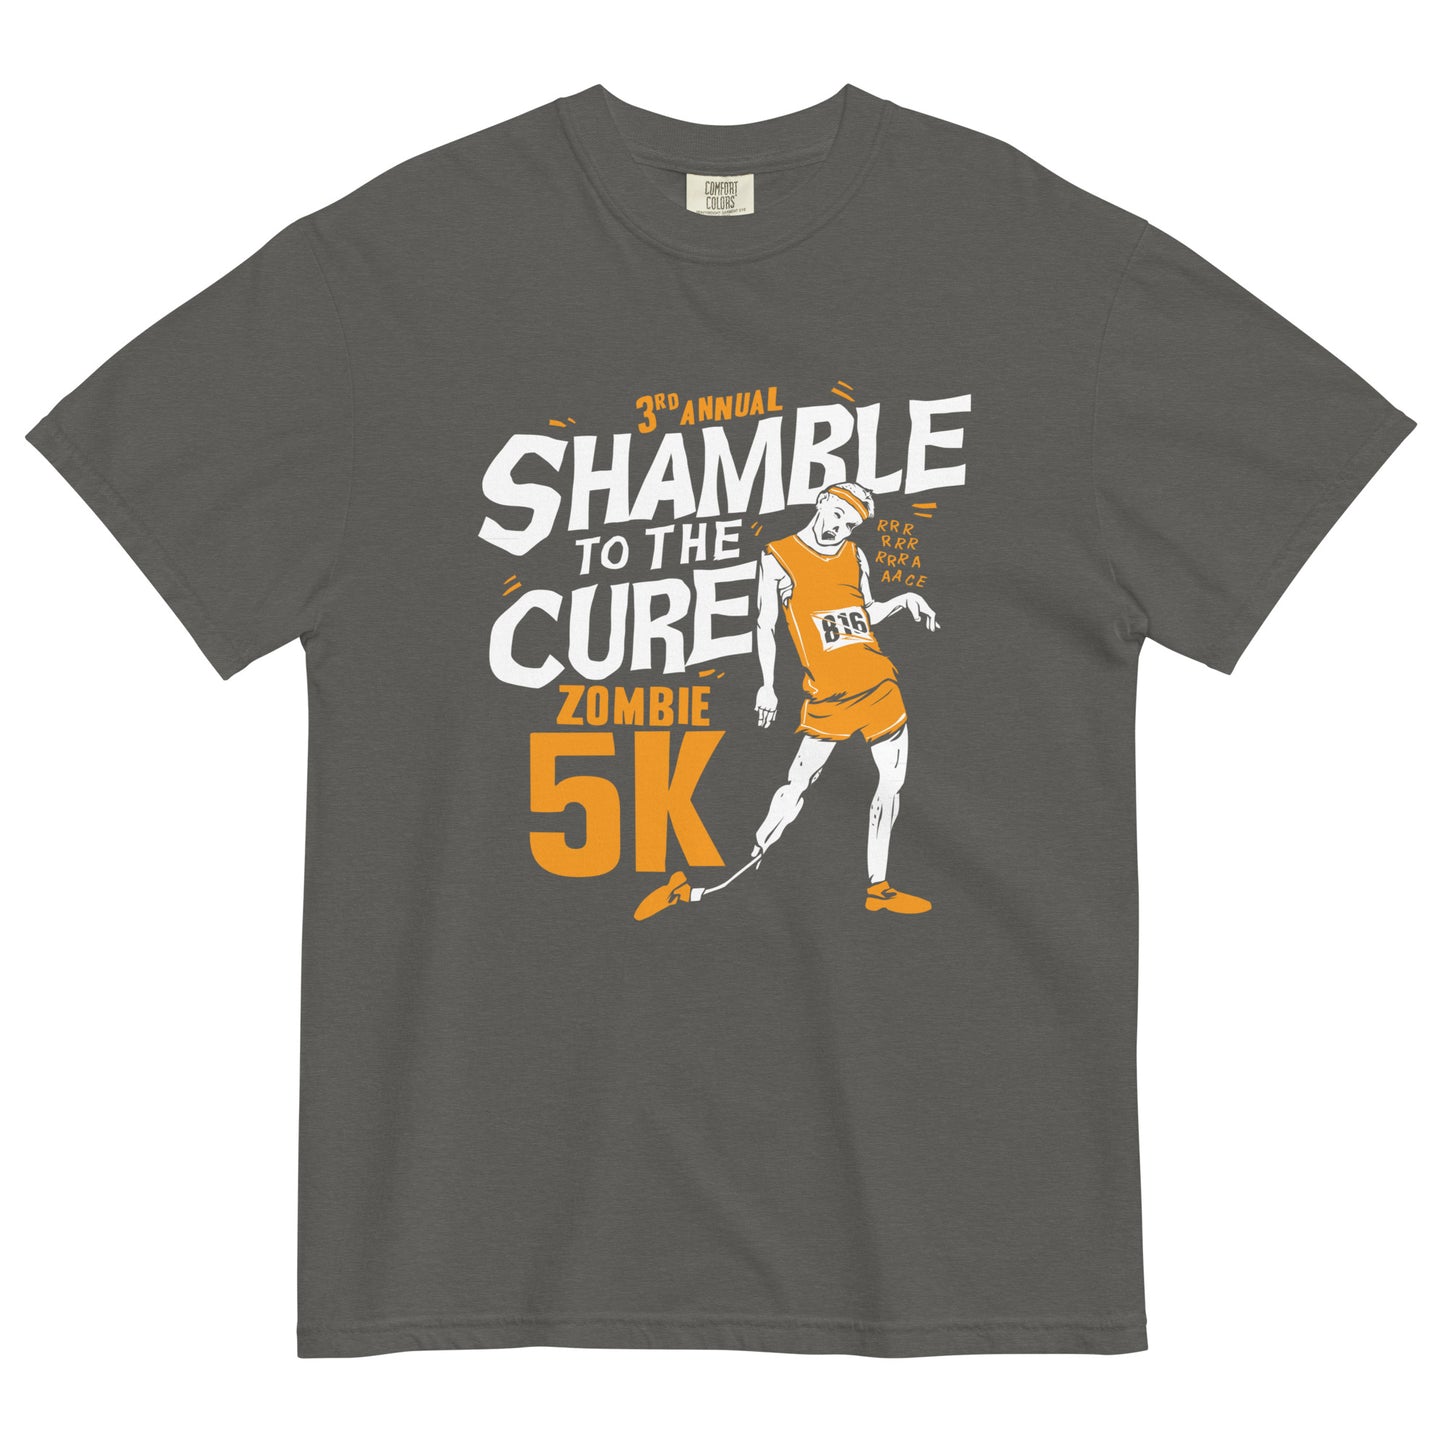 Shamble To The Cure Zombie 5K Men's Relaxed Fit Tee